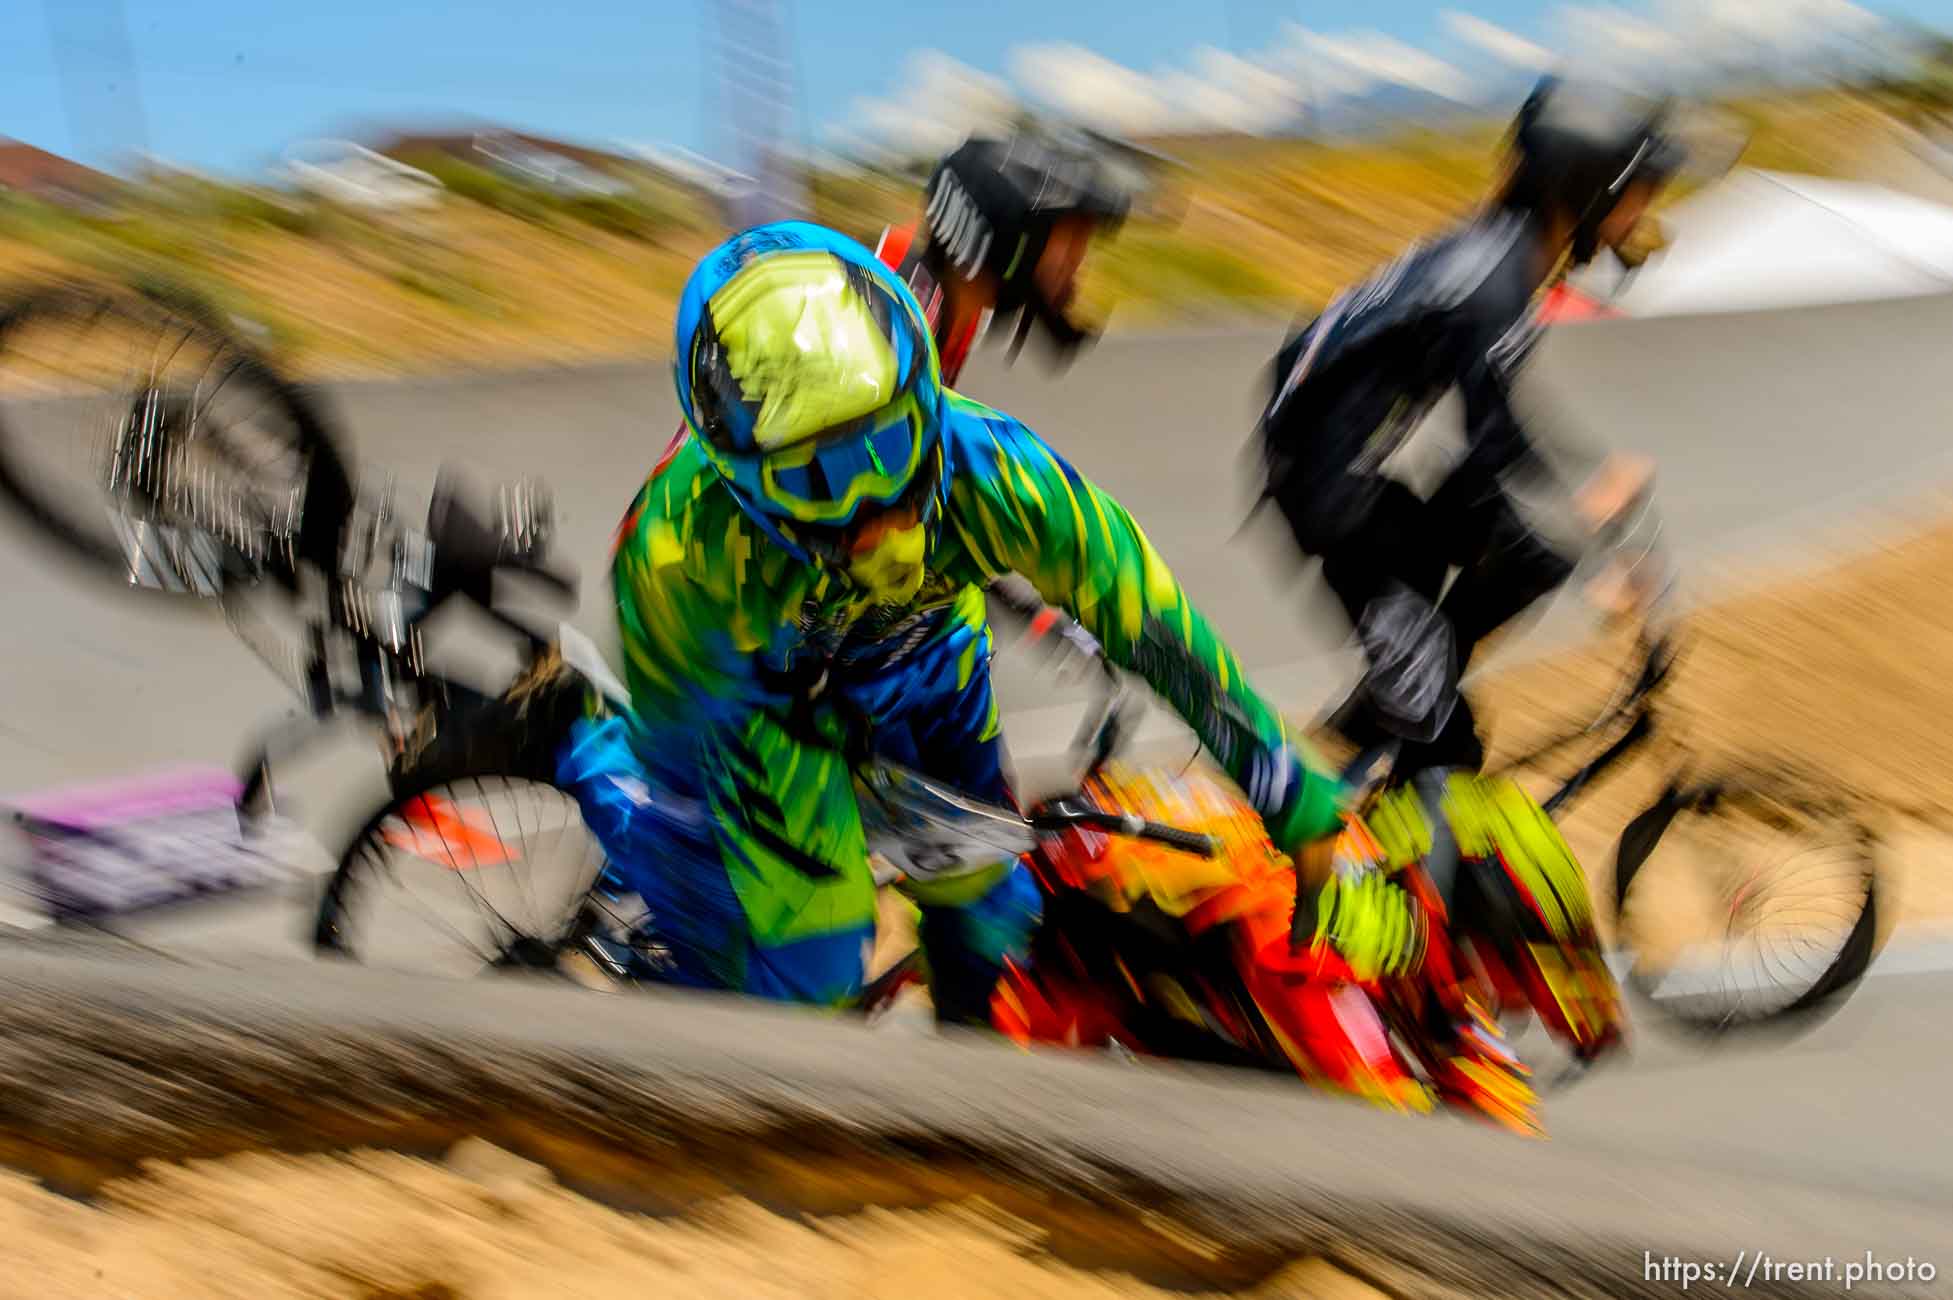 Trent Nelson  |  The Salt Lake Tribune
Riders crash in the expert class at the U.S. BMX National Series at Rad Canyon BMX in South Jordan, Saturday June 13, 2015.